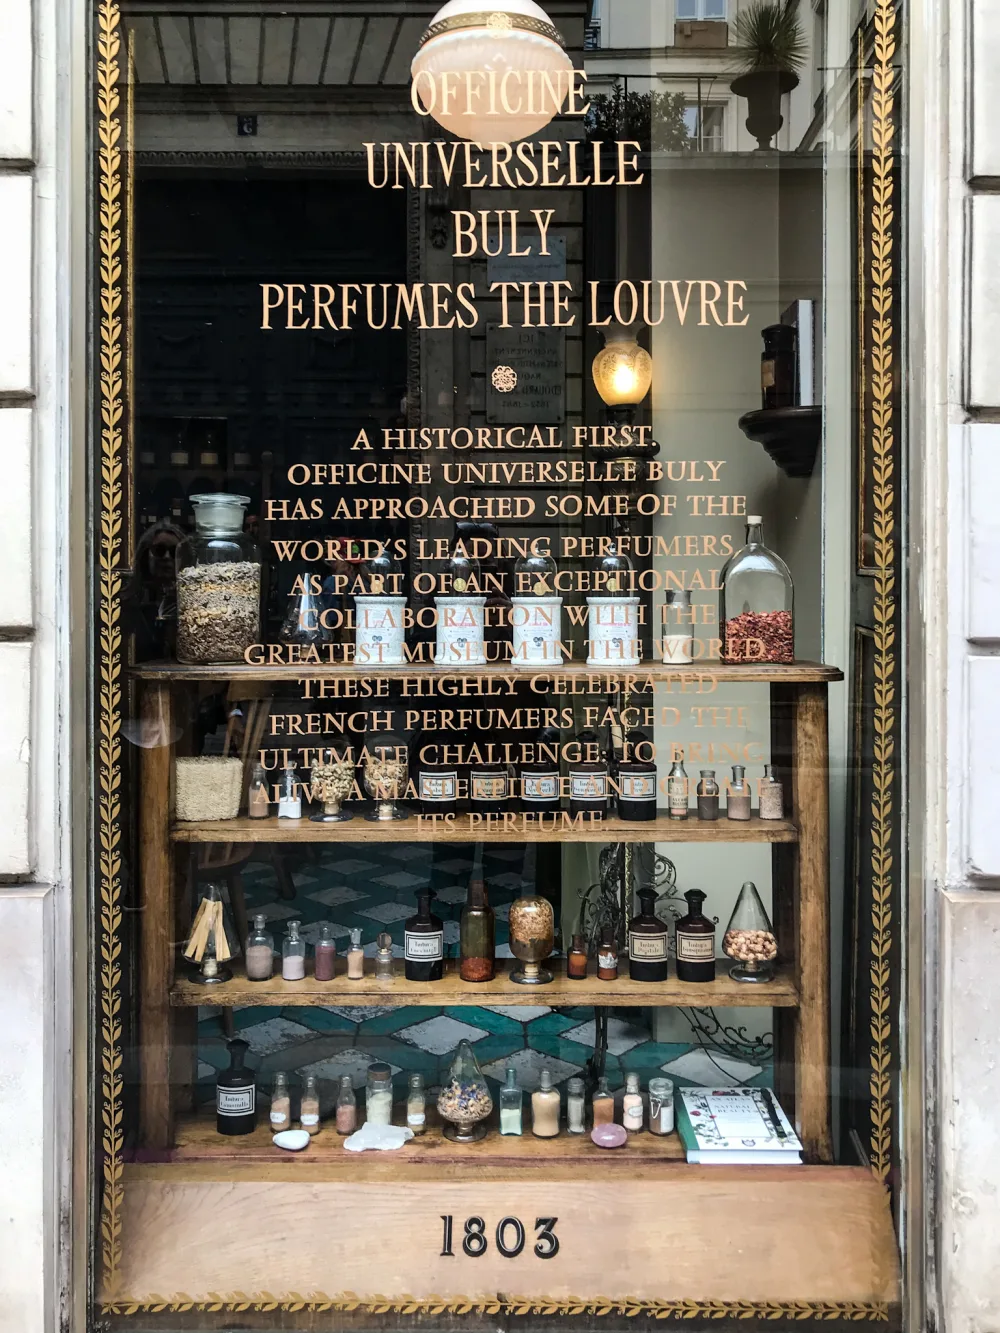 ᴛᴀᴛᴀ🐣327💋 on X: #LISA in Officine Universelle Buly 1803 🇫🇷 Founded in  1803 at 6 rue Bonaparte in Paris, Buly 1803 is a beautiful, old-school  apothecary filled with extravagant yet affordabl